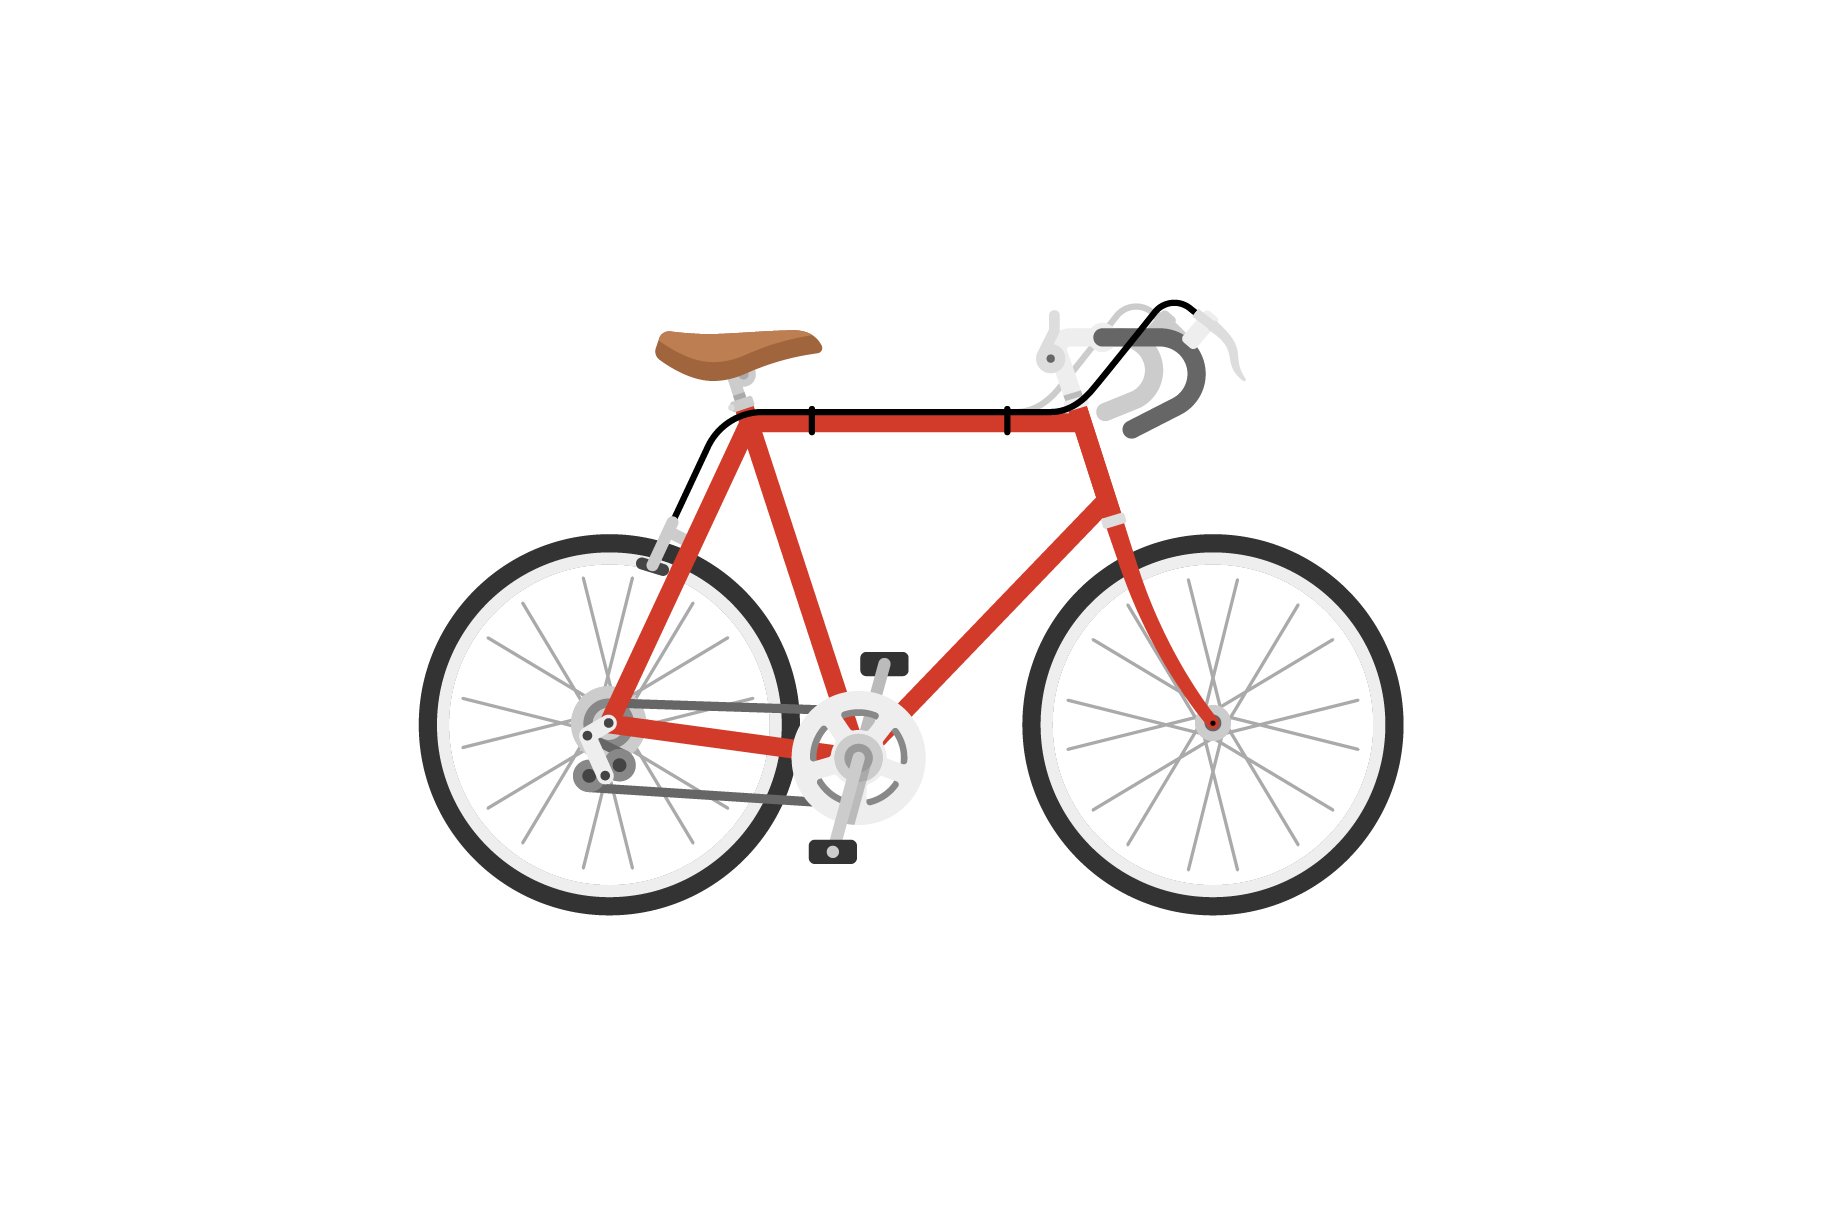 Simple red bicycle.